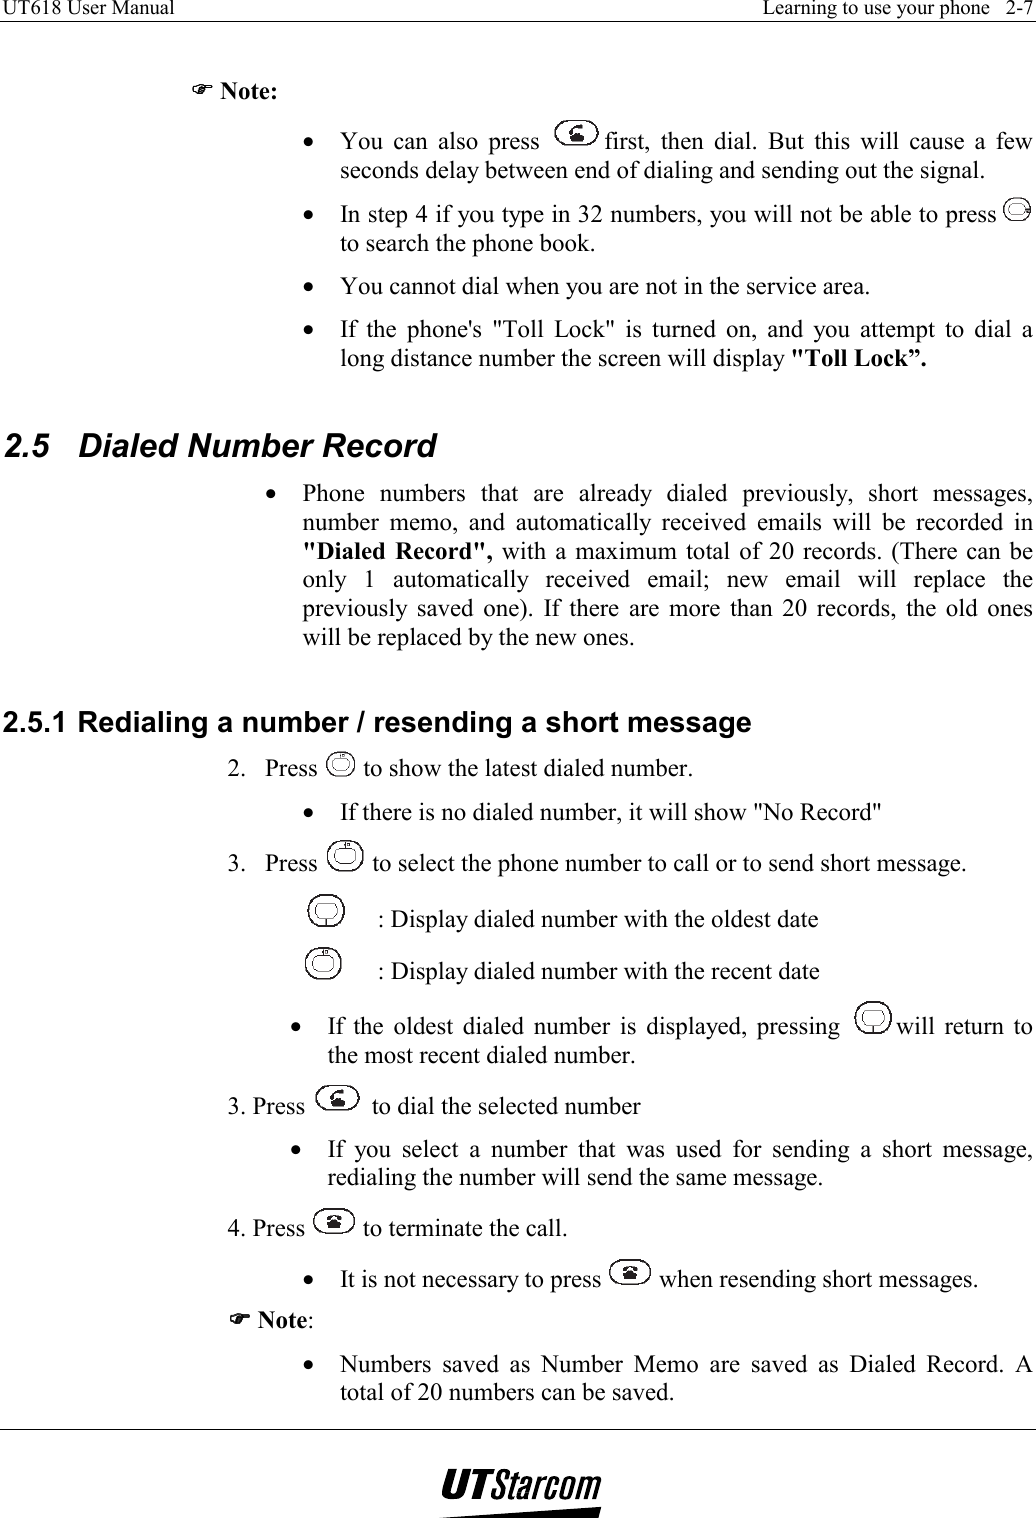 UT618 User Manual    Learning to use your phone   2-7    )))) Note: •  You can also press  first, then dial. But this will cause a few seconds delay between end of dialing and sending out the signal. •  In step 4 if you type in 32 numbers, you will not be able to press   to search the phone book. •  You cannot dial when you are not in the service area. •  If the phone&apos;s &quot;Toll Lock&quot; is turned on, and you attempt to dial a long distance number the screen will display &quot;Toll Lock”.  2.5  Dialed Number Record •  Phone numbers that are already dialed previously, short messages, number memo, and automatically received emails will be recorded in &quot;Dialed Record&quot;, with a maximum total of 20 records. (There can be only 1 automatically received email; new email will replace the previously saved one). If there are more than 20 records, the old ones will be replaced by the new ones.  2.5.1 Redialing a number / resending a short message 2. Press   to show the latest dialed number. •  If there is no dialed number, it will show &quot;No Record&quot; 3. Press   to select the phone number to call or to send short message.   : Display dialed number with the oldest date   : Display dialed number with the recent date •  If the oldest dialed number is displayed, pressing  will return to the most recent dialed number. 3. Press   to dial the selected number •  If you select a number that was used for sending a short message, redialing the number will send the same message. 4. Press   to terminate the call. •  It is not necessary to press   when resending short messages. )))) Note: •  Numbers saved as Number Memo are saved as Dialed Record. A total of 20 numbers can be saved. 